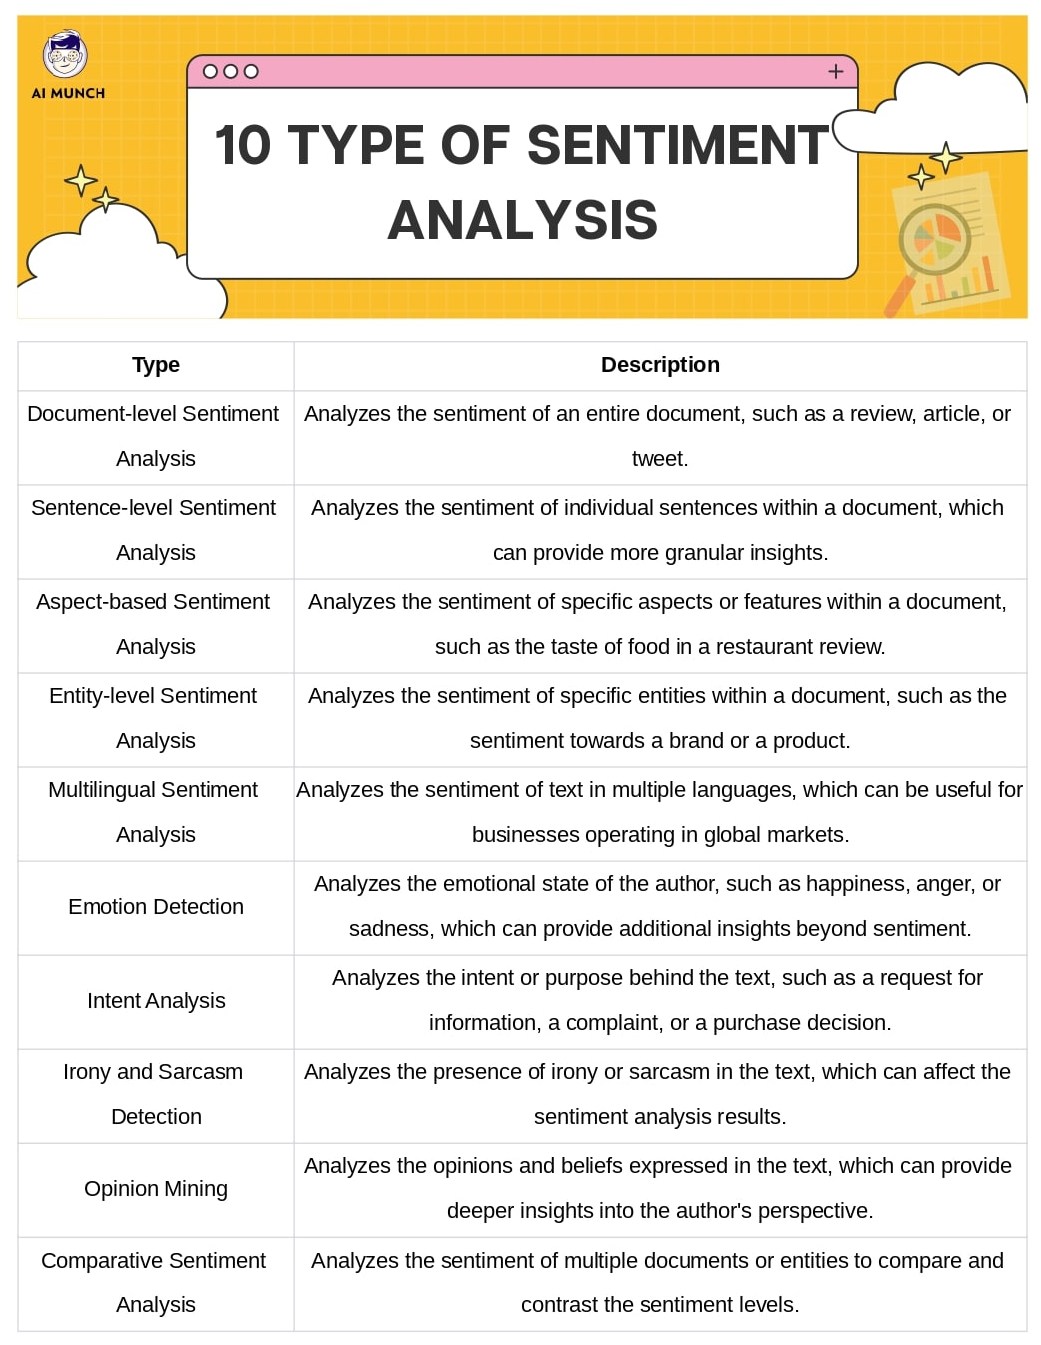 10 types of Sentiment Analysis Model with AI